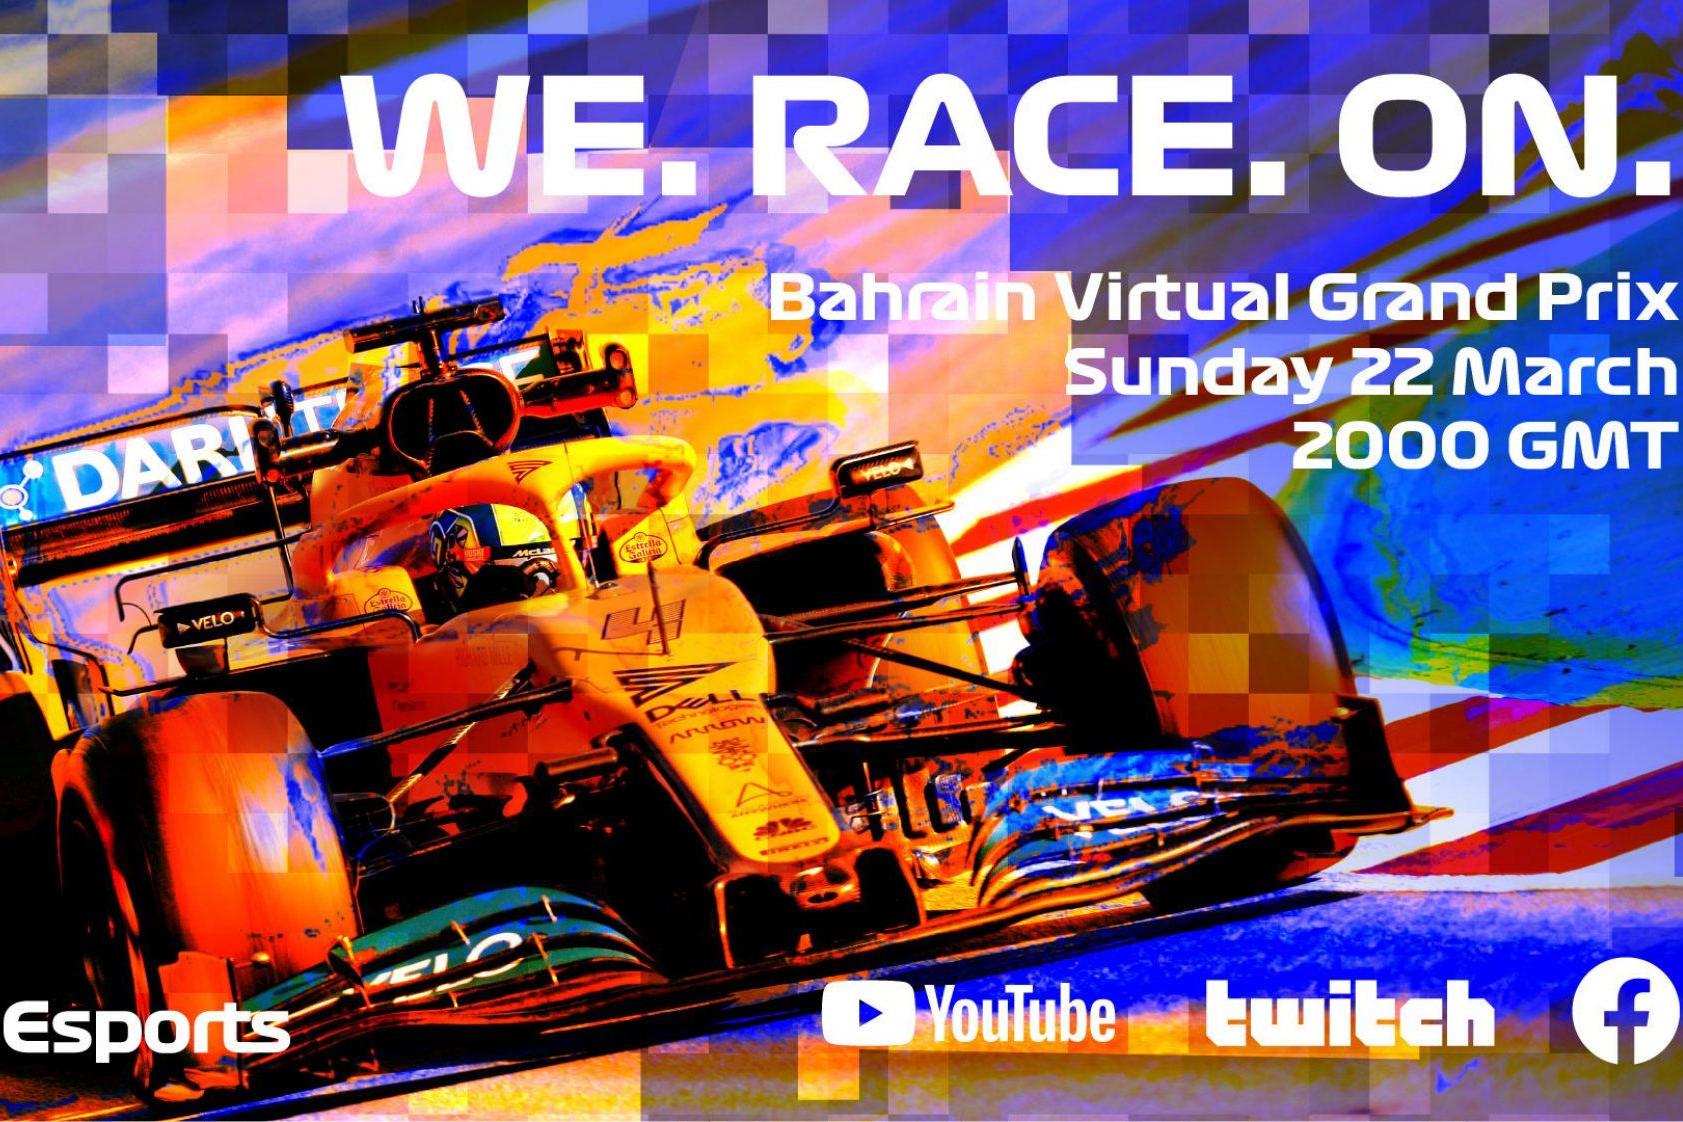 Formula One ran the Virtual Bahrain Grand Prix live to replace this weekend's cancelled race